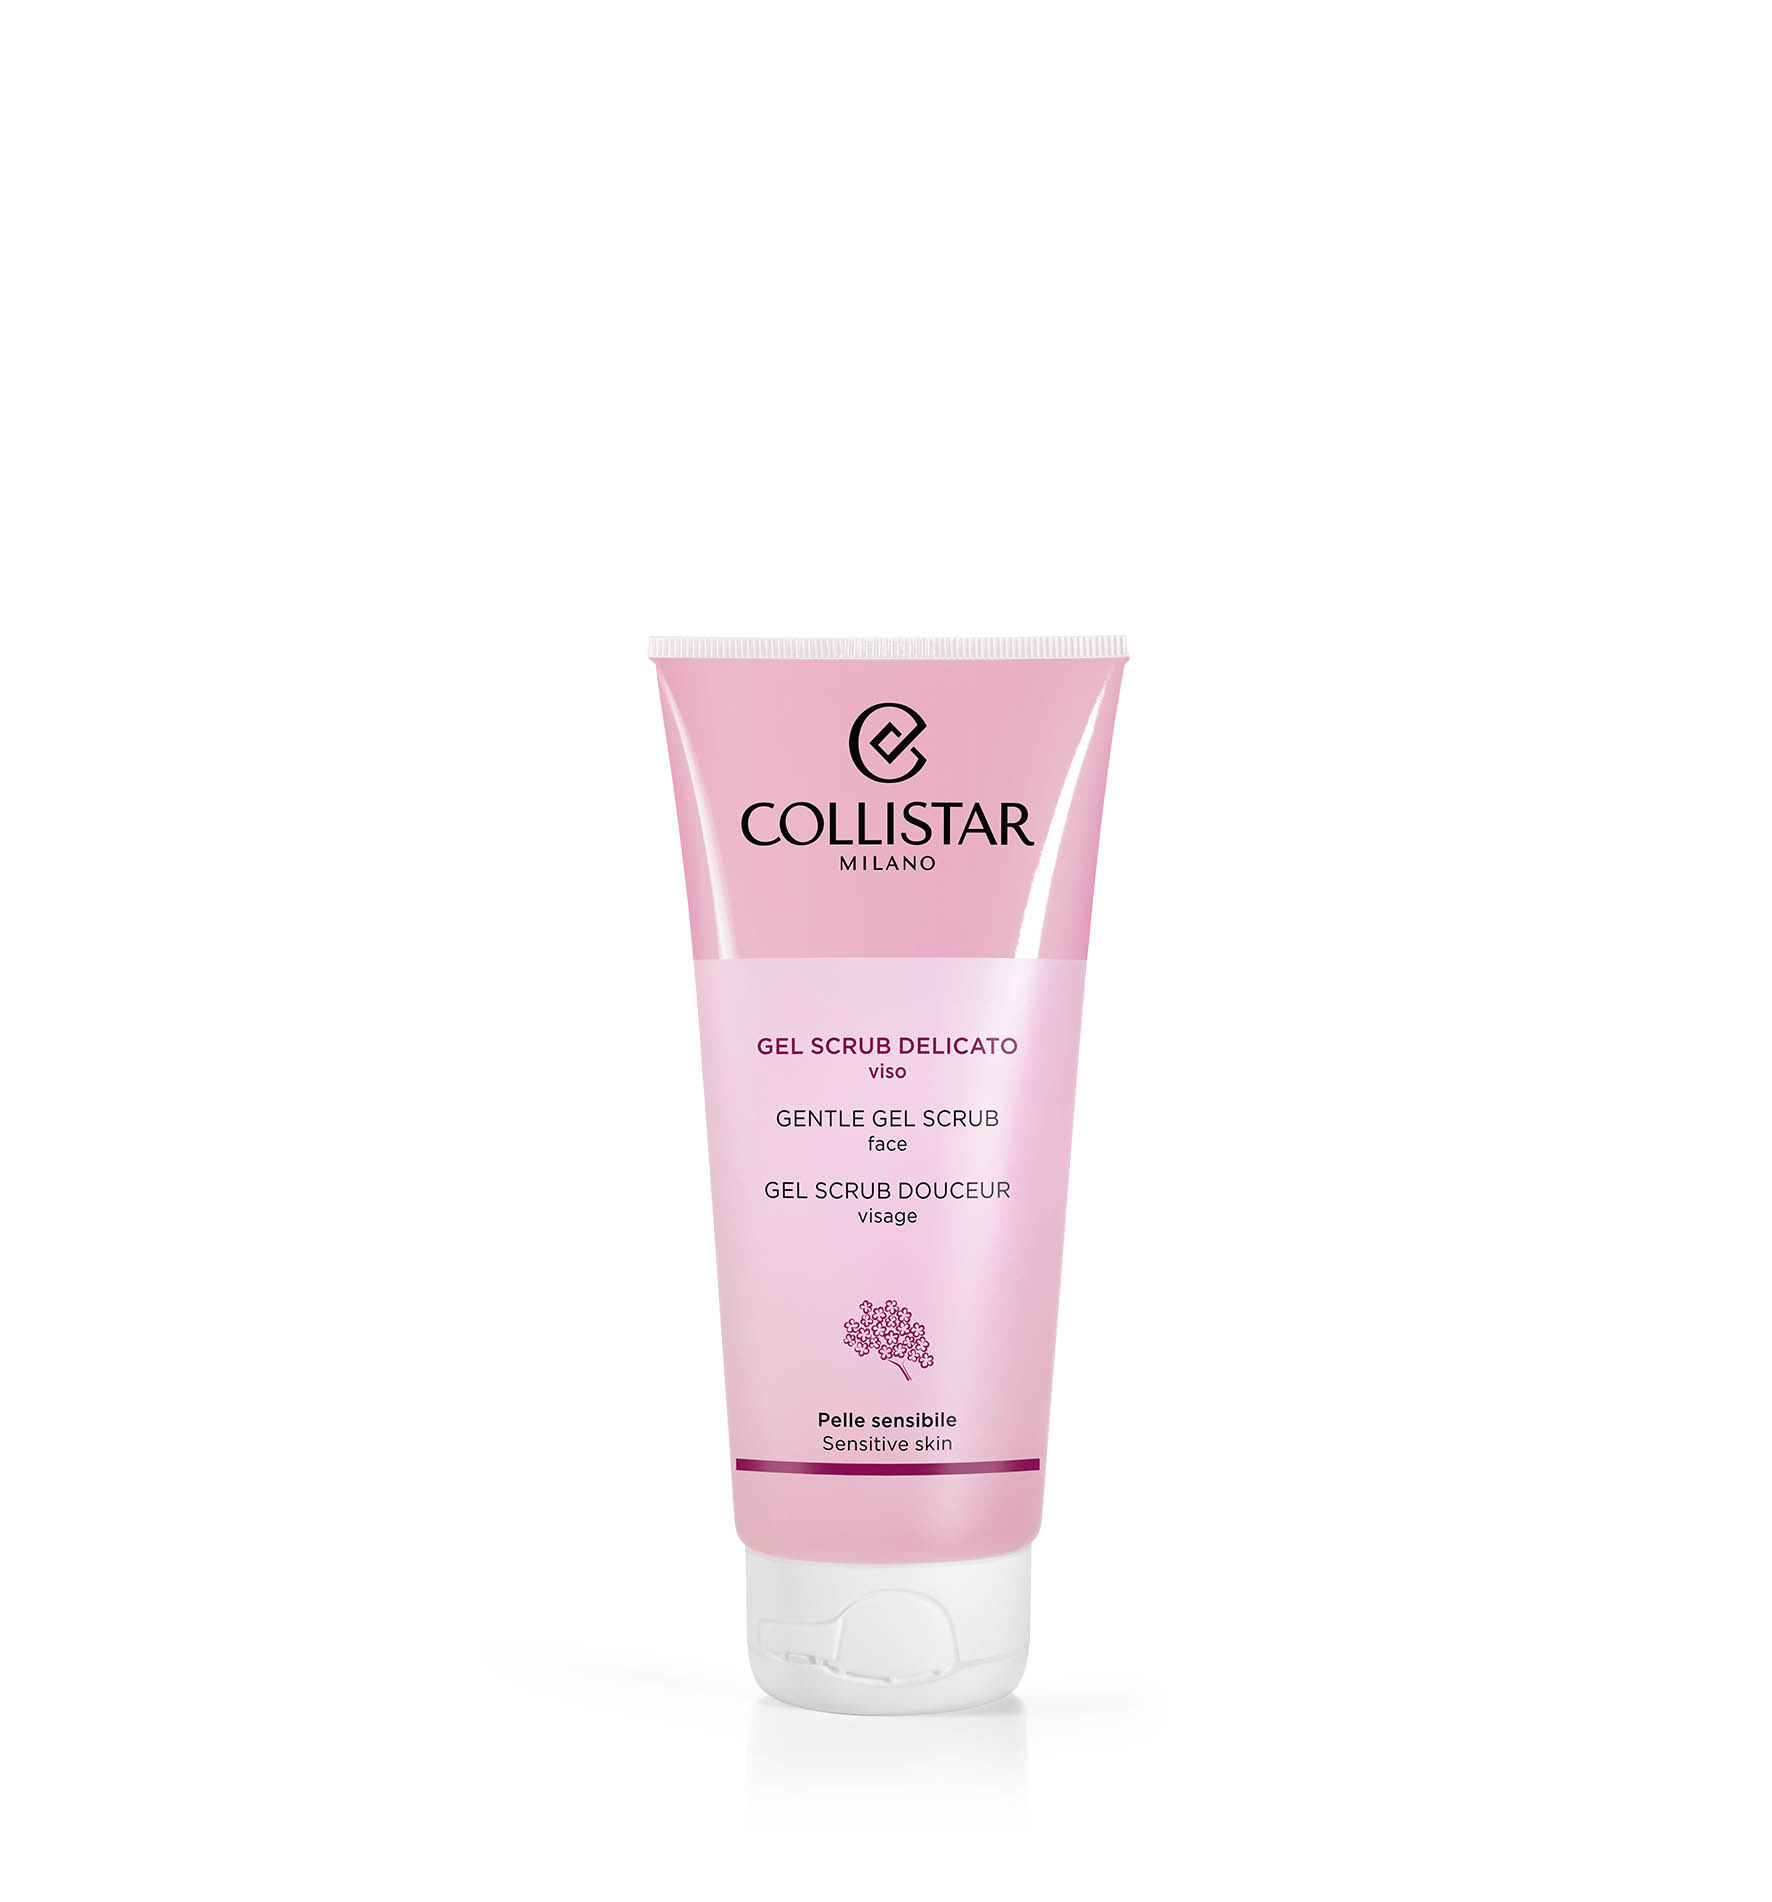 GENTLE GEL SCRUB FACE - Combination and Oily Skin | Collistar - Shop Online Ufficiale